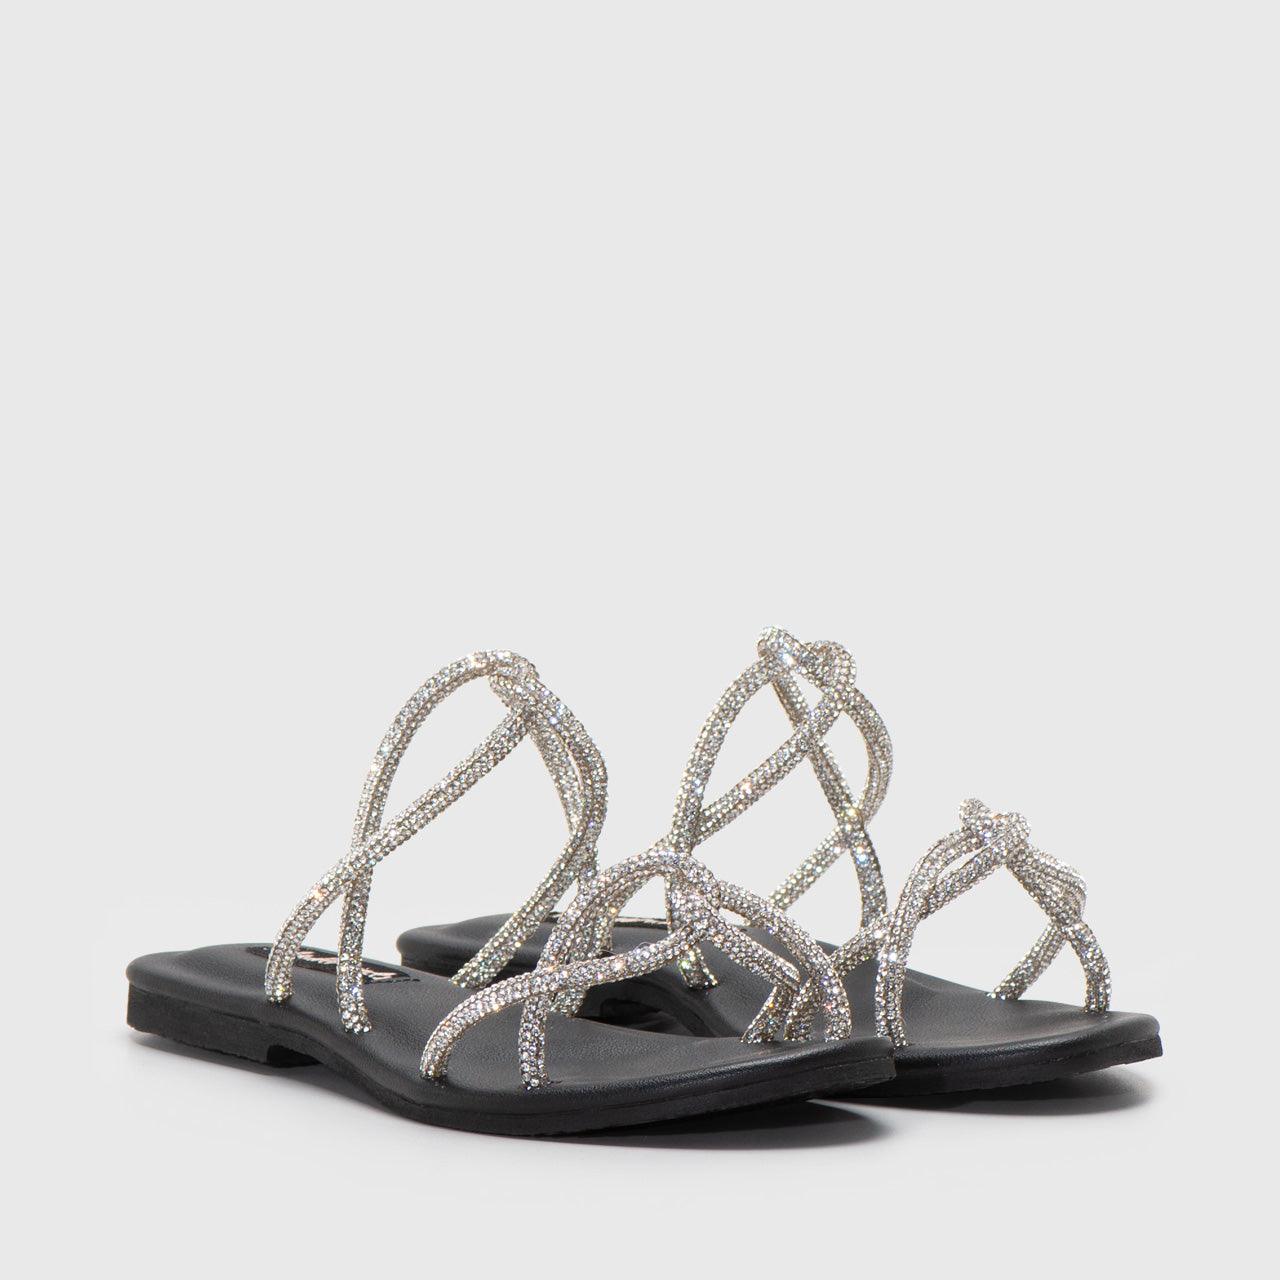 Adorable Projects Sandals 39 / Silver Lucania Sandal Silver